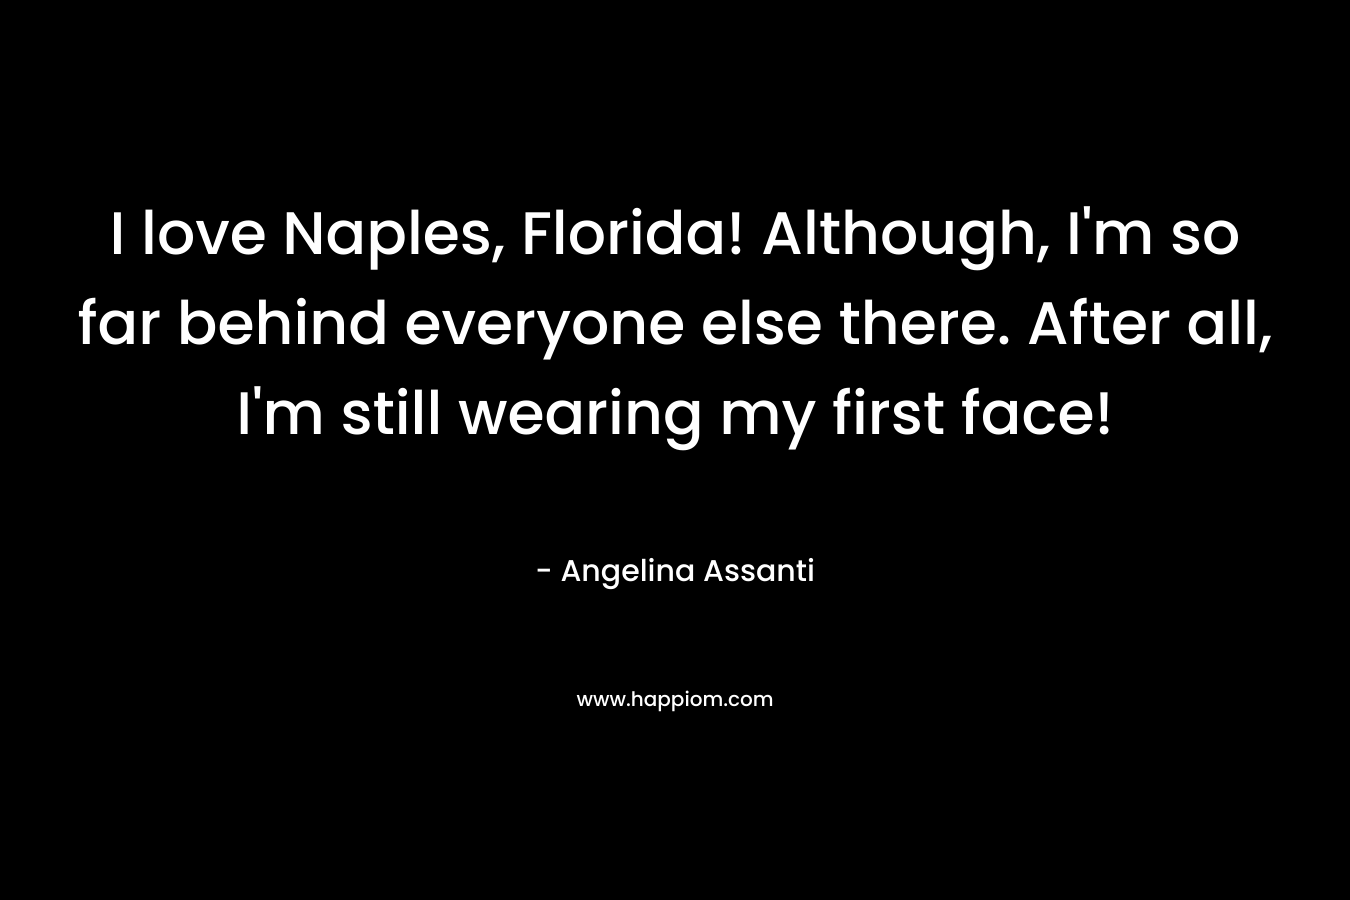 I love Naples, Florida! Although, I'm so far behind everyone else there. After all, I'm still wearing my first face!